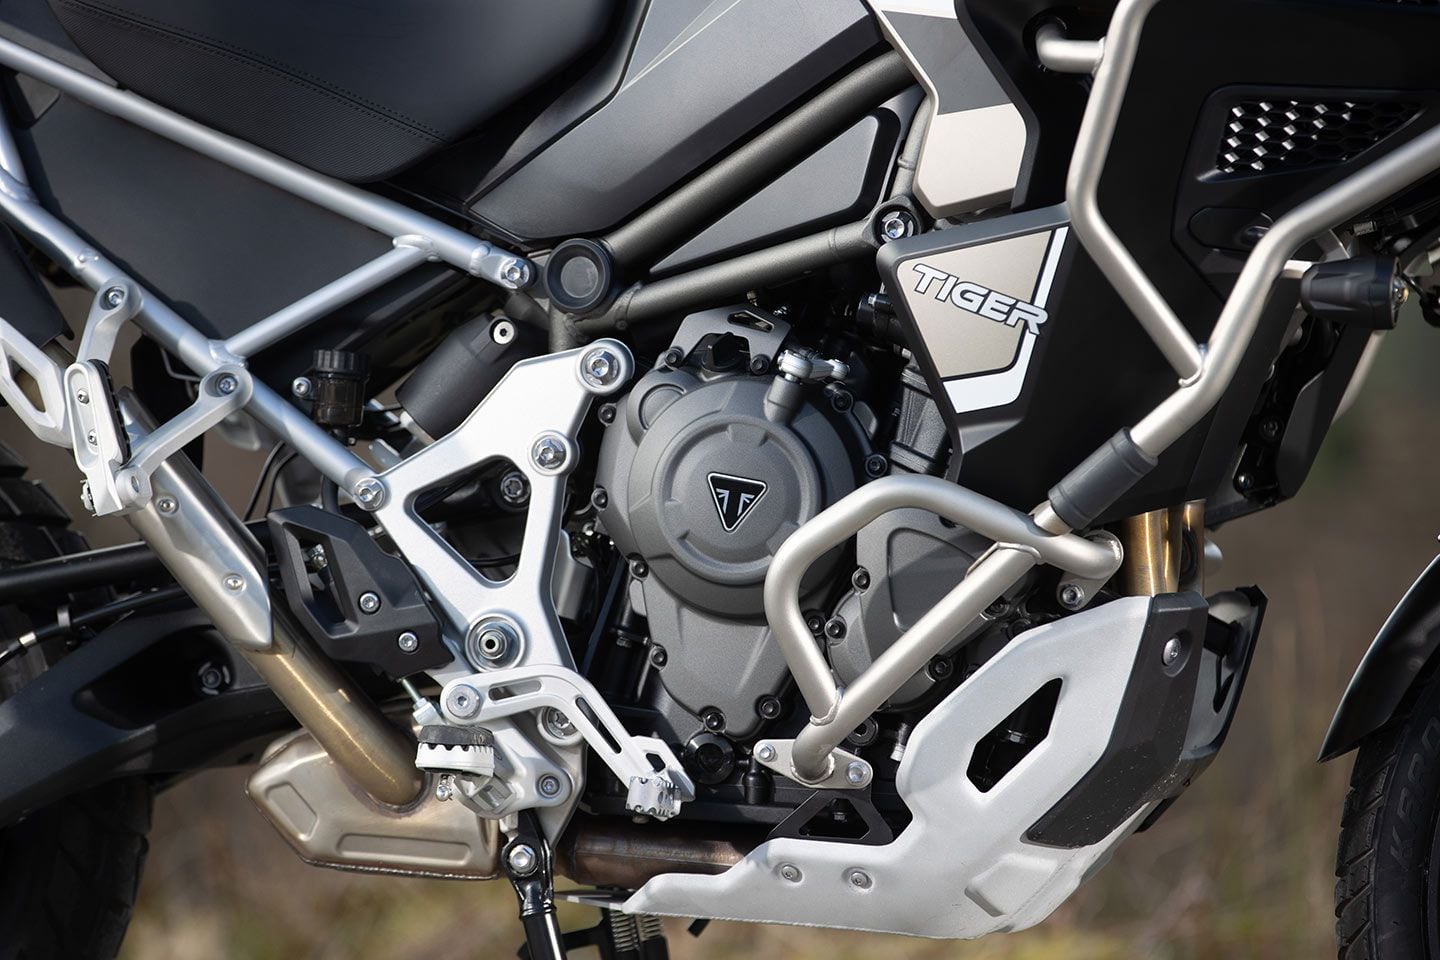 As always, Triumph’s fit and finish is exceptional.